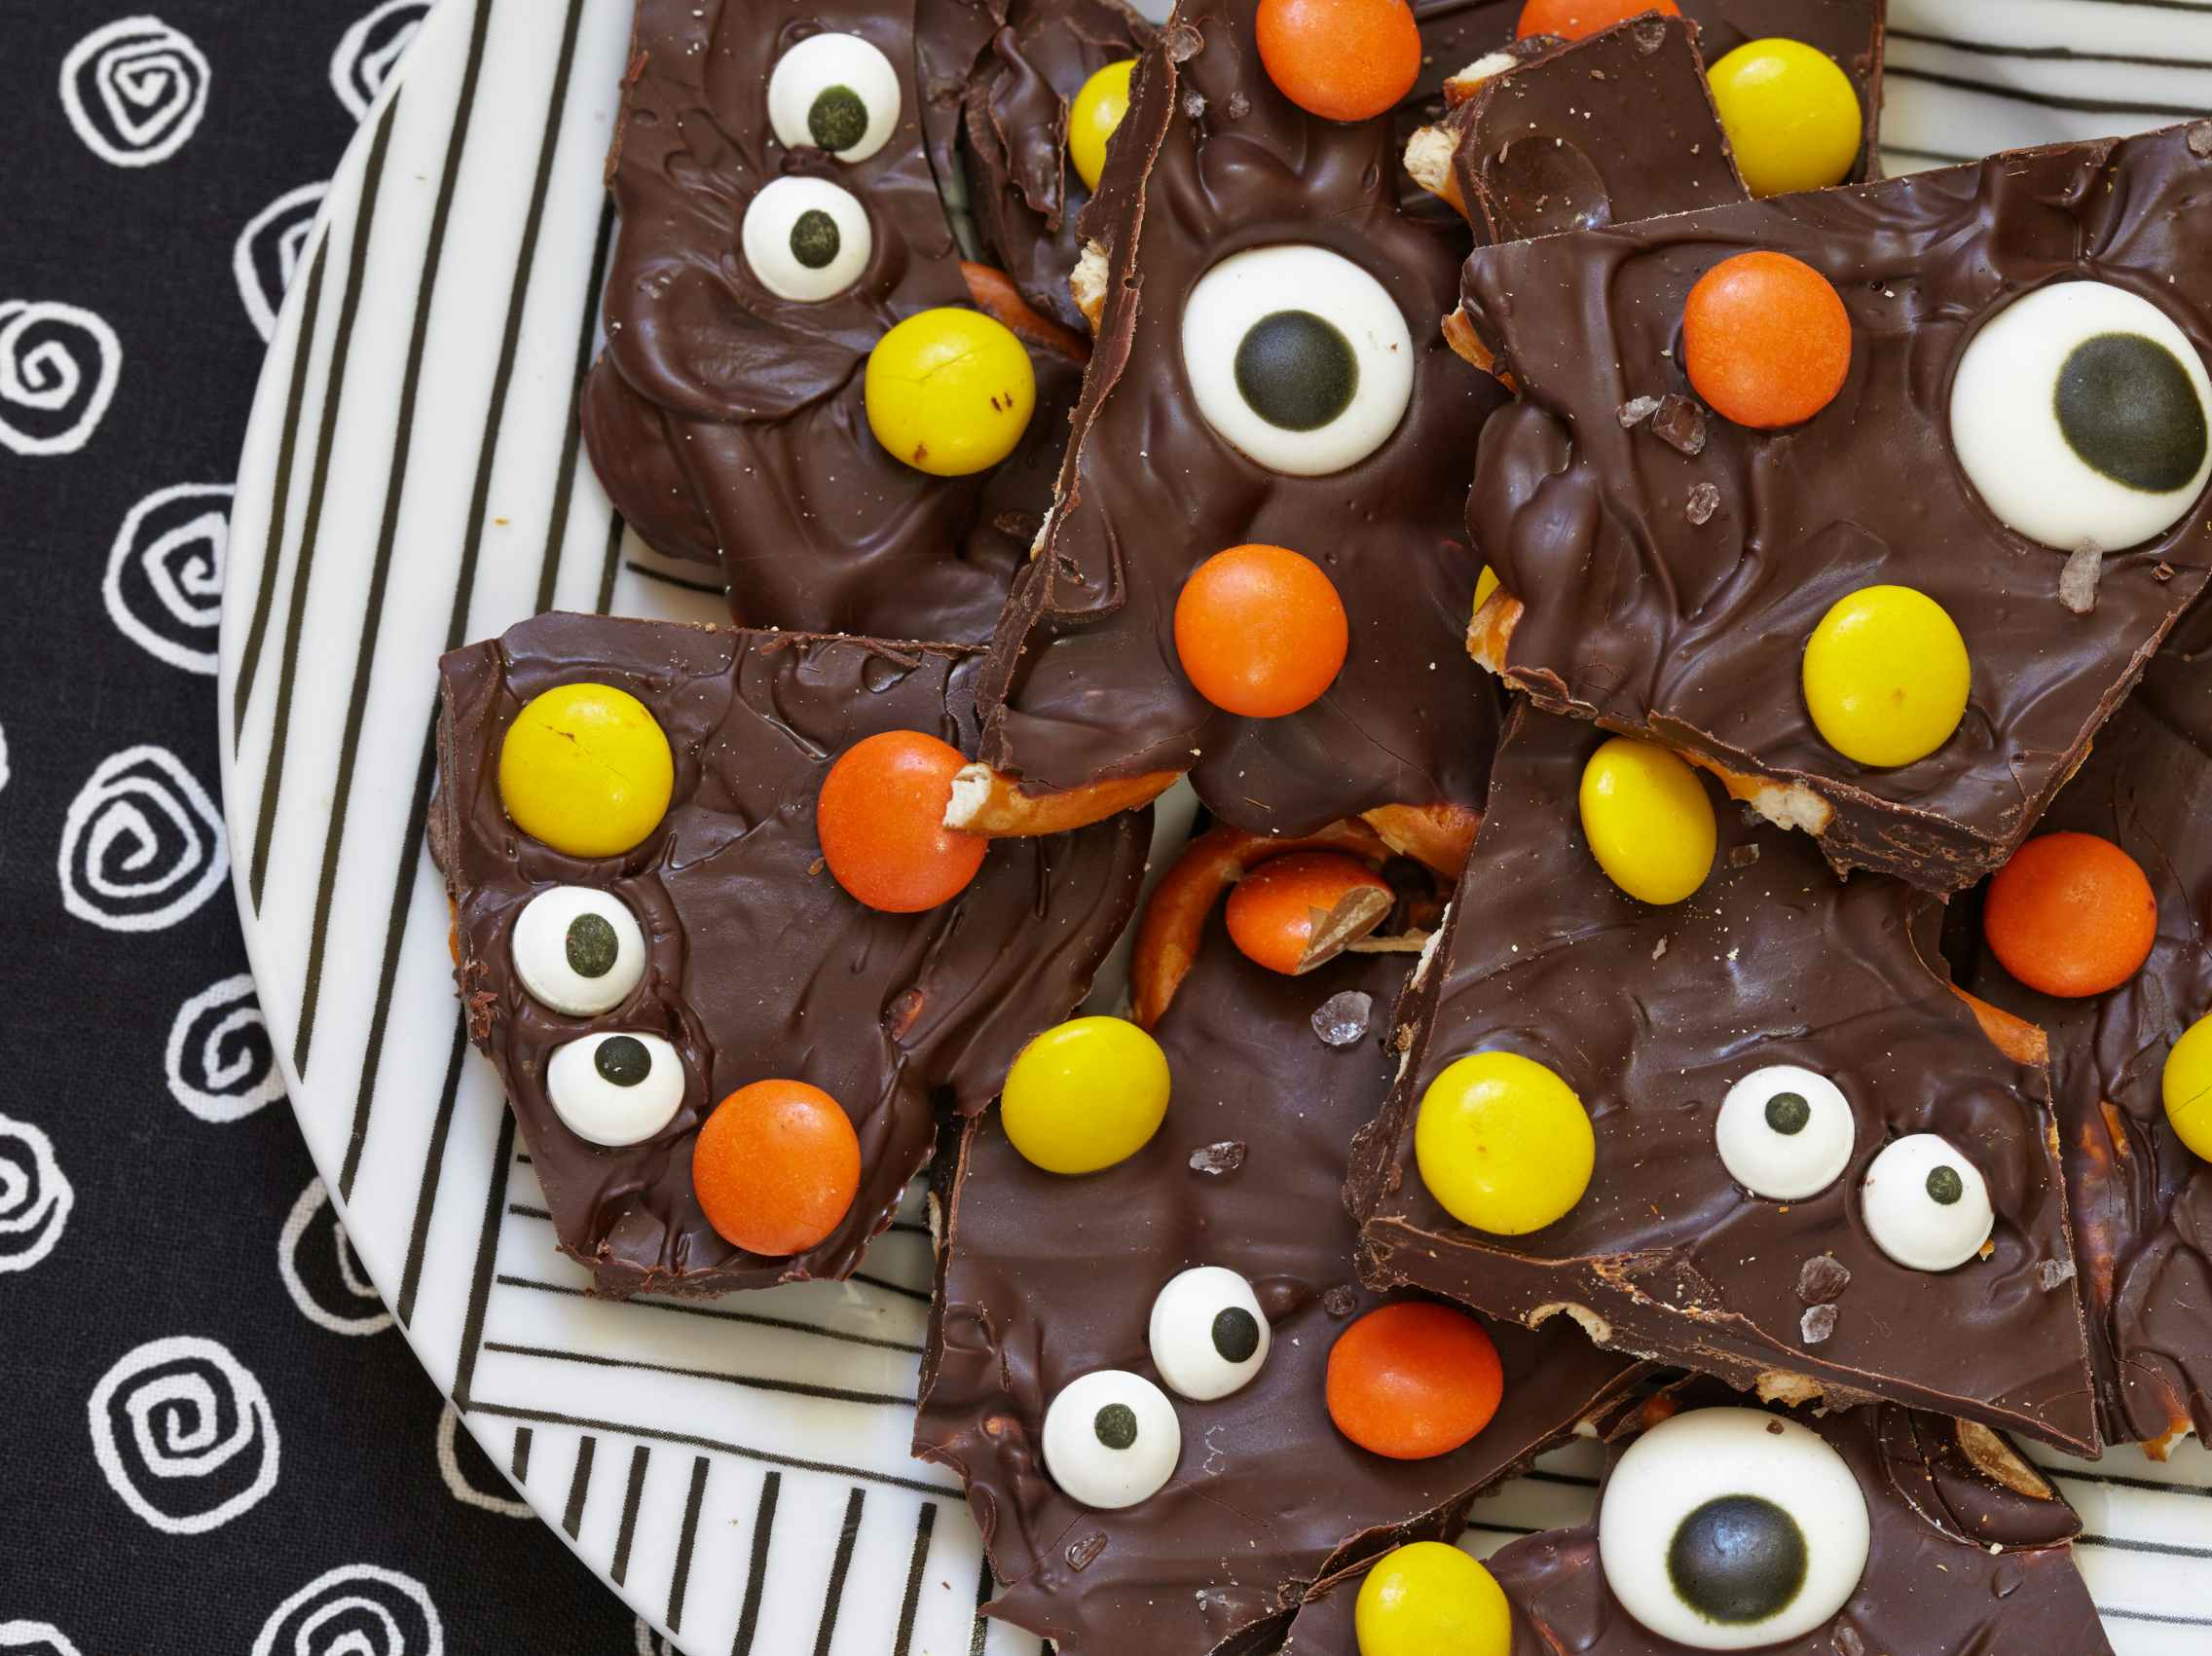 A plate of chocolate bark made with Reese's pieces.